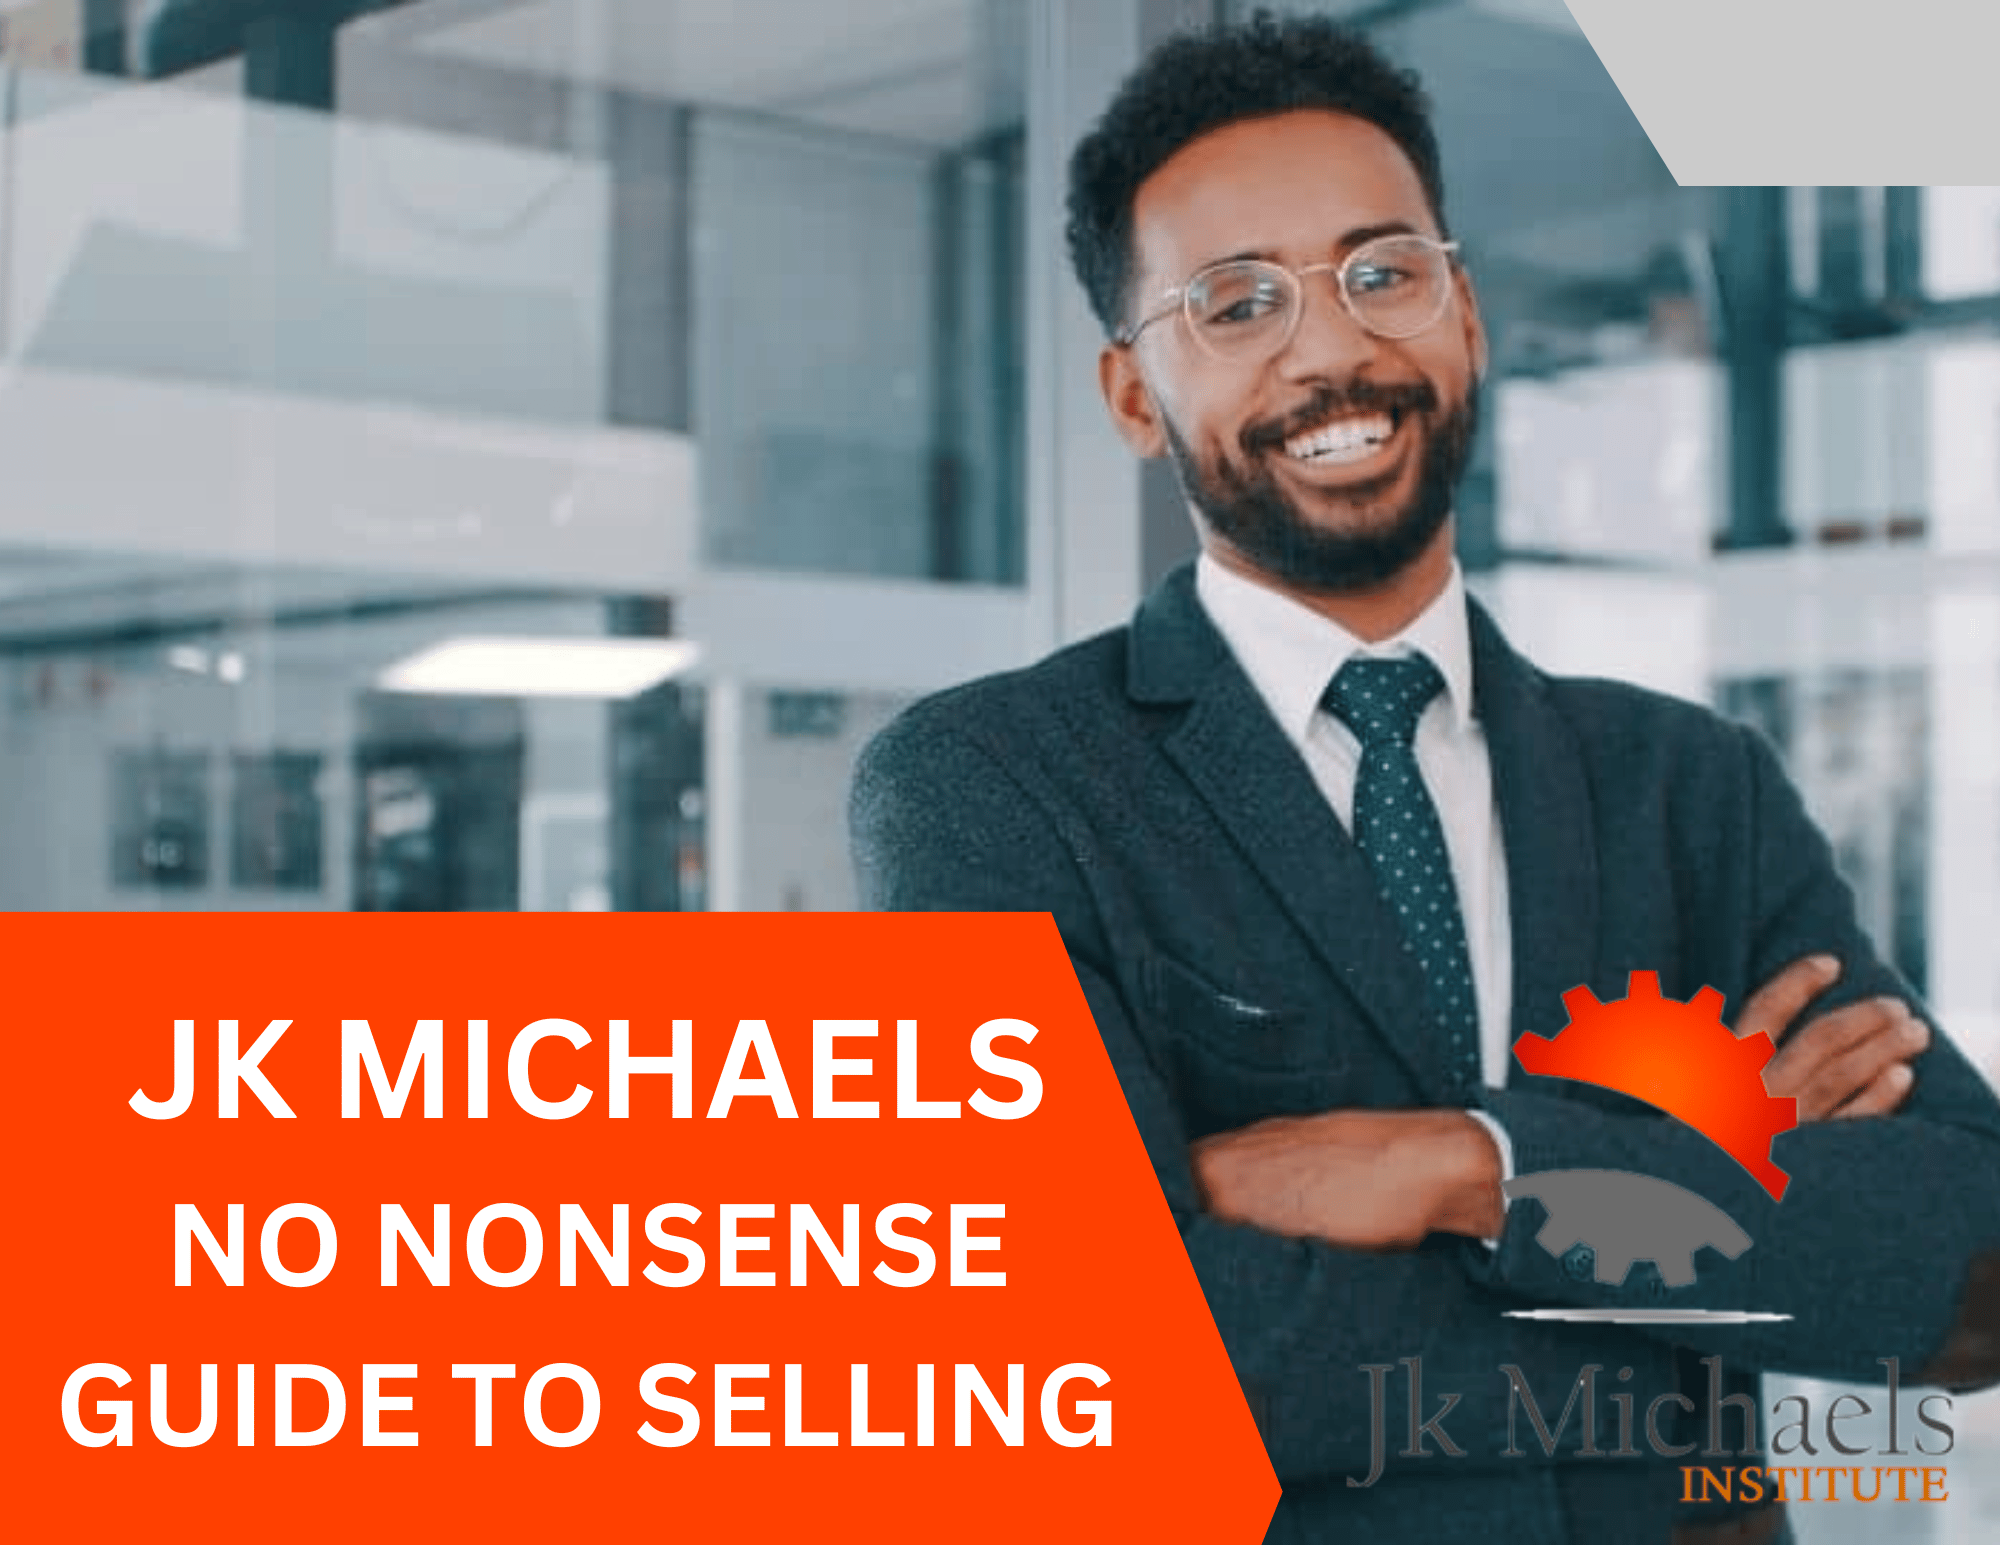 NO NONSENSE GUIDE TO SELLING